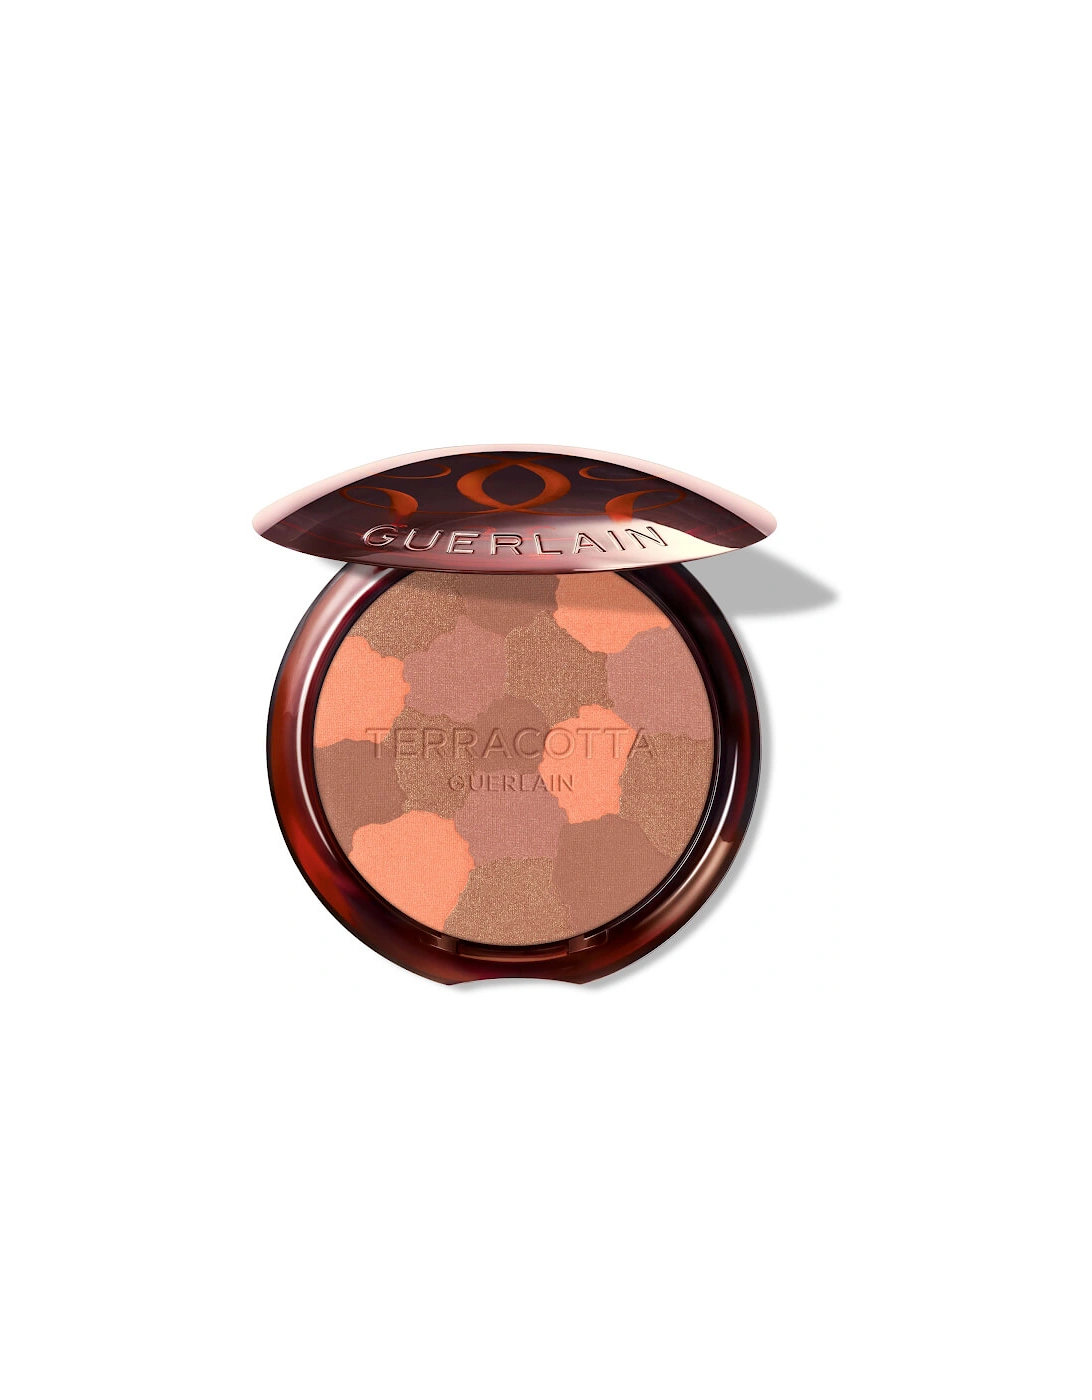 Terracotta Light The Sun-Kissed Natural Healthy Glow Powder - 05 Deep Warm, 2 of 1